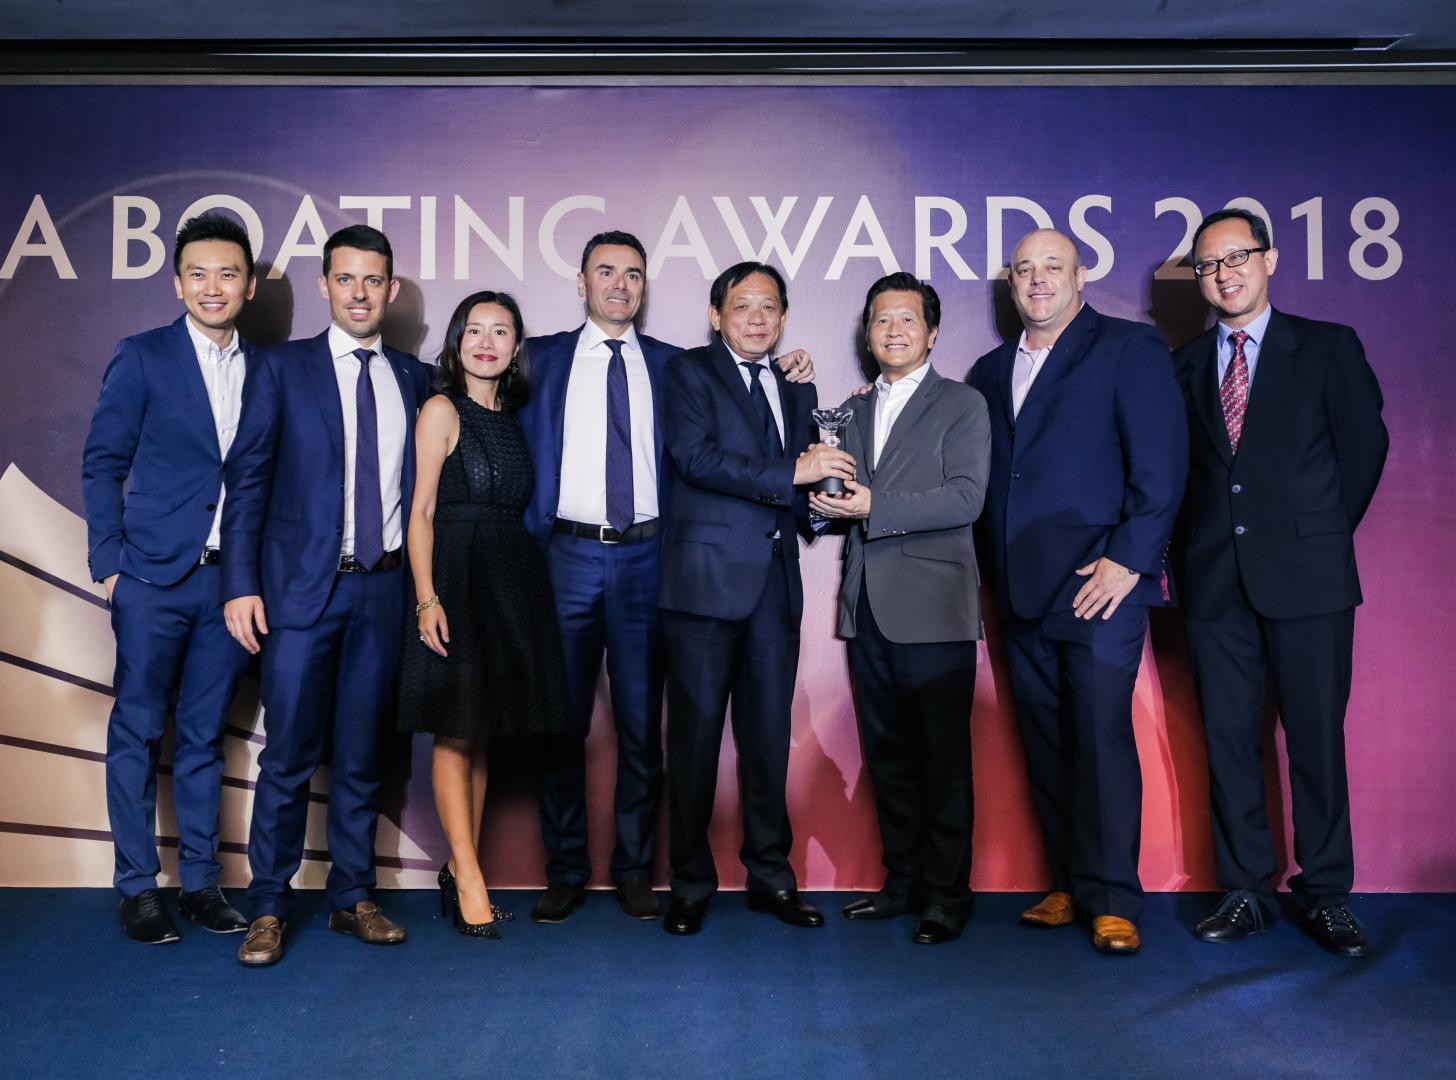 The team from Azimut Yachts collecting the award for ‘Best Brand Presence in Asia’